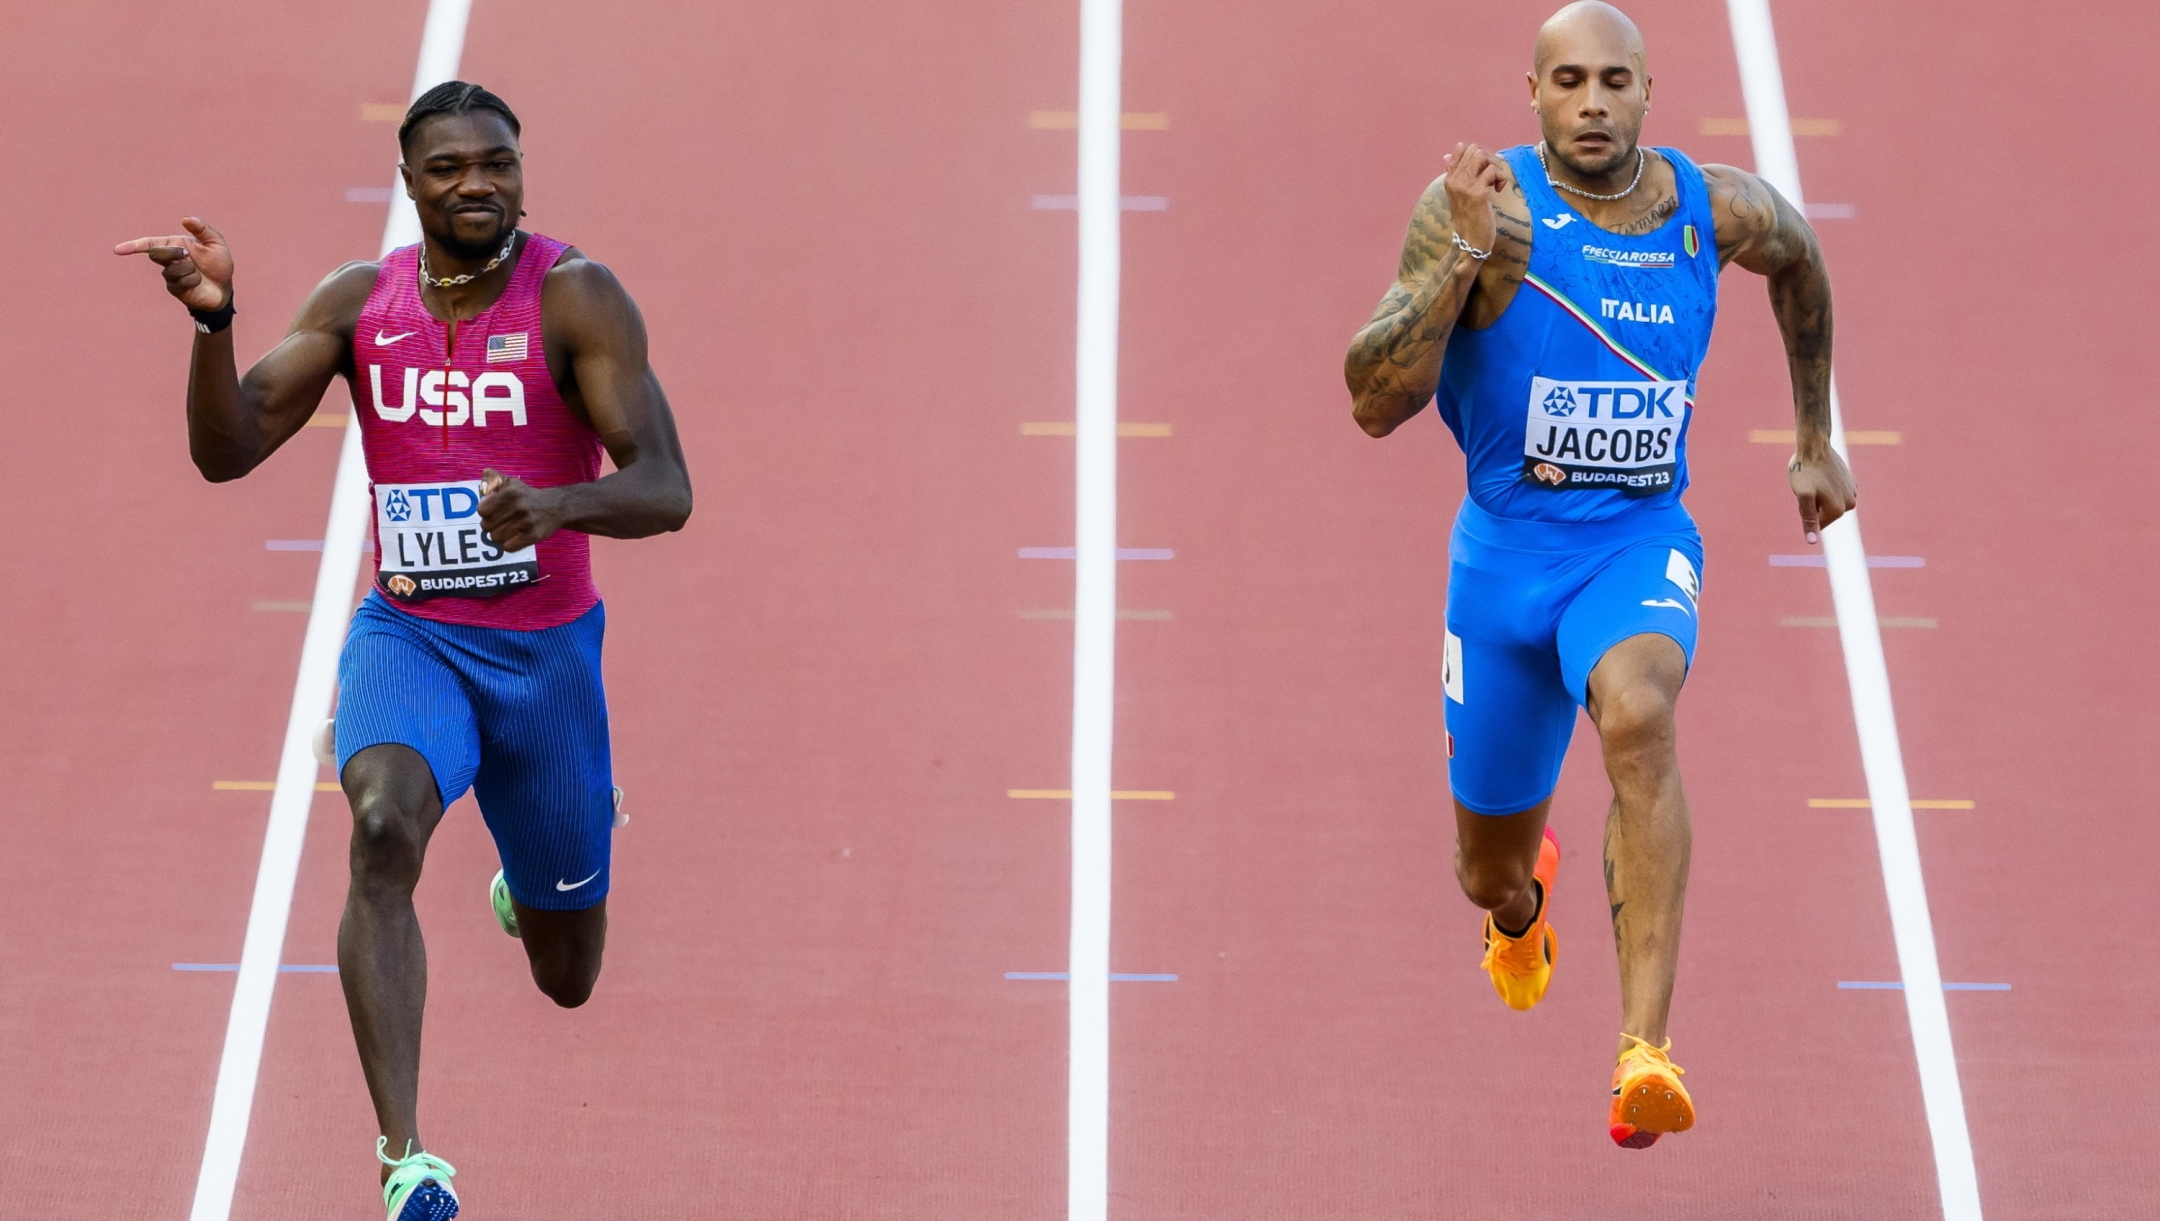 epa10810038 Noah Lyles (L) of the USA in action next to Lamont Marcell Jacobs of Italy during the men's 100 meters semi-final of the World Athletics Championships in Budapest, Hungary, 20 August 2023.  EPA/JEAN-CHRISTOPHE BOTT